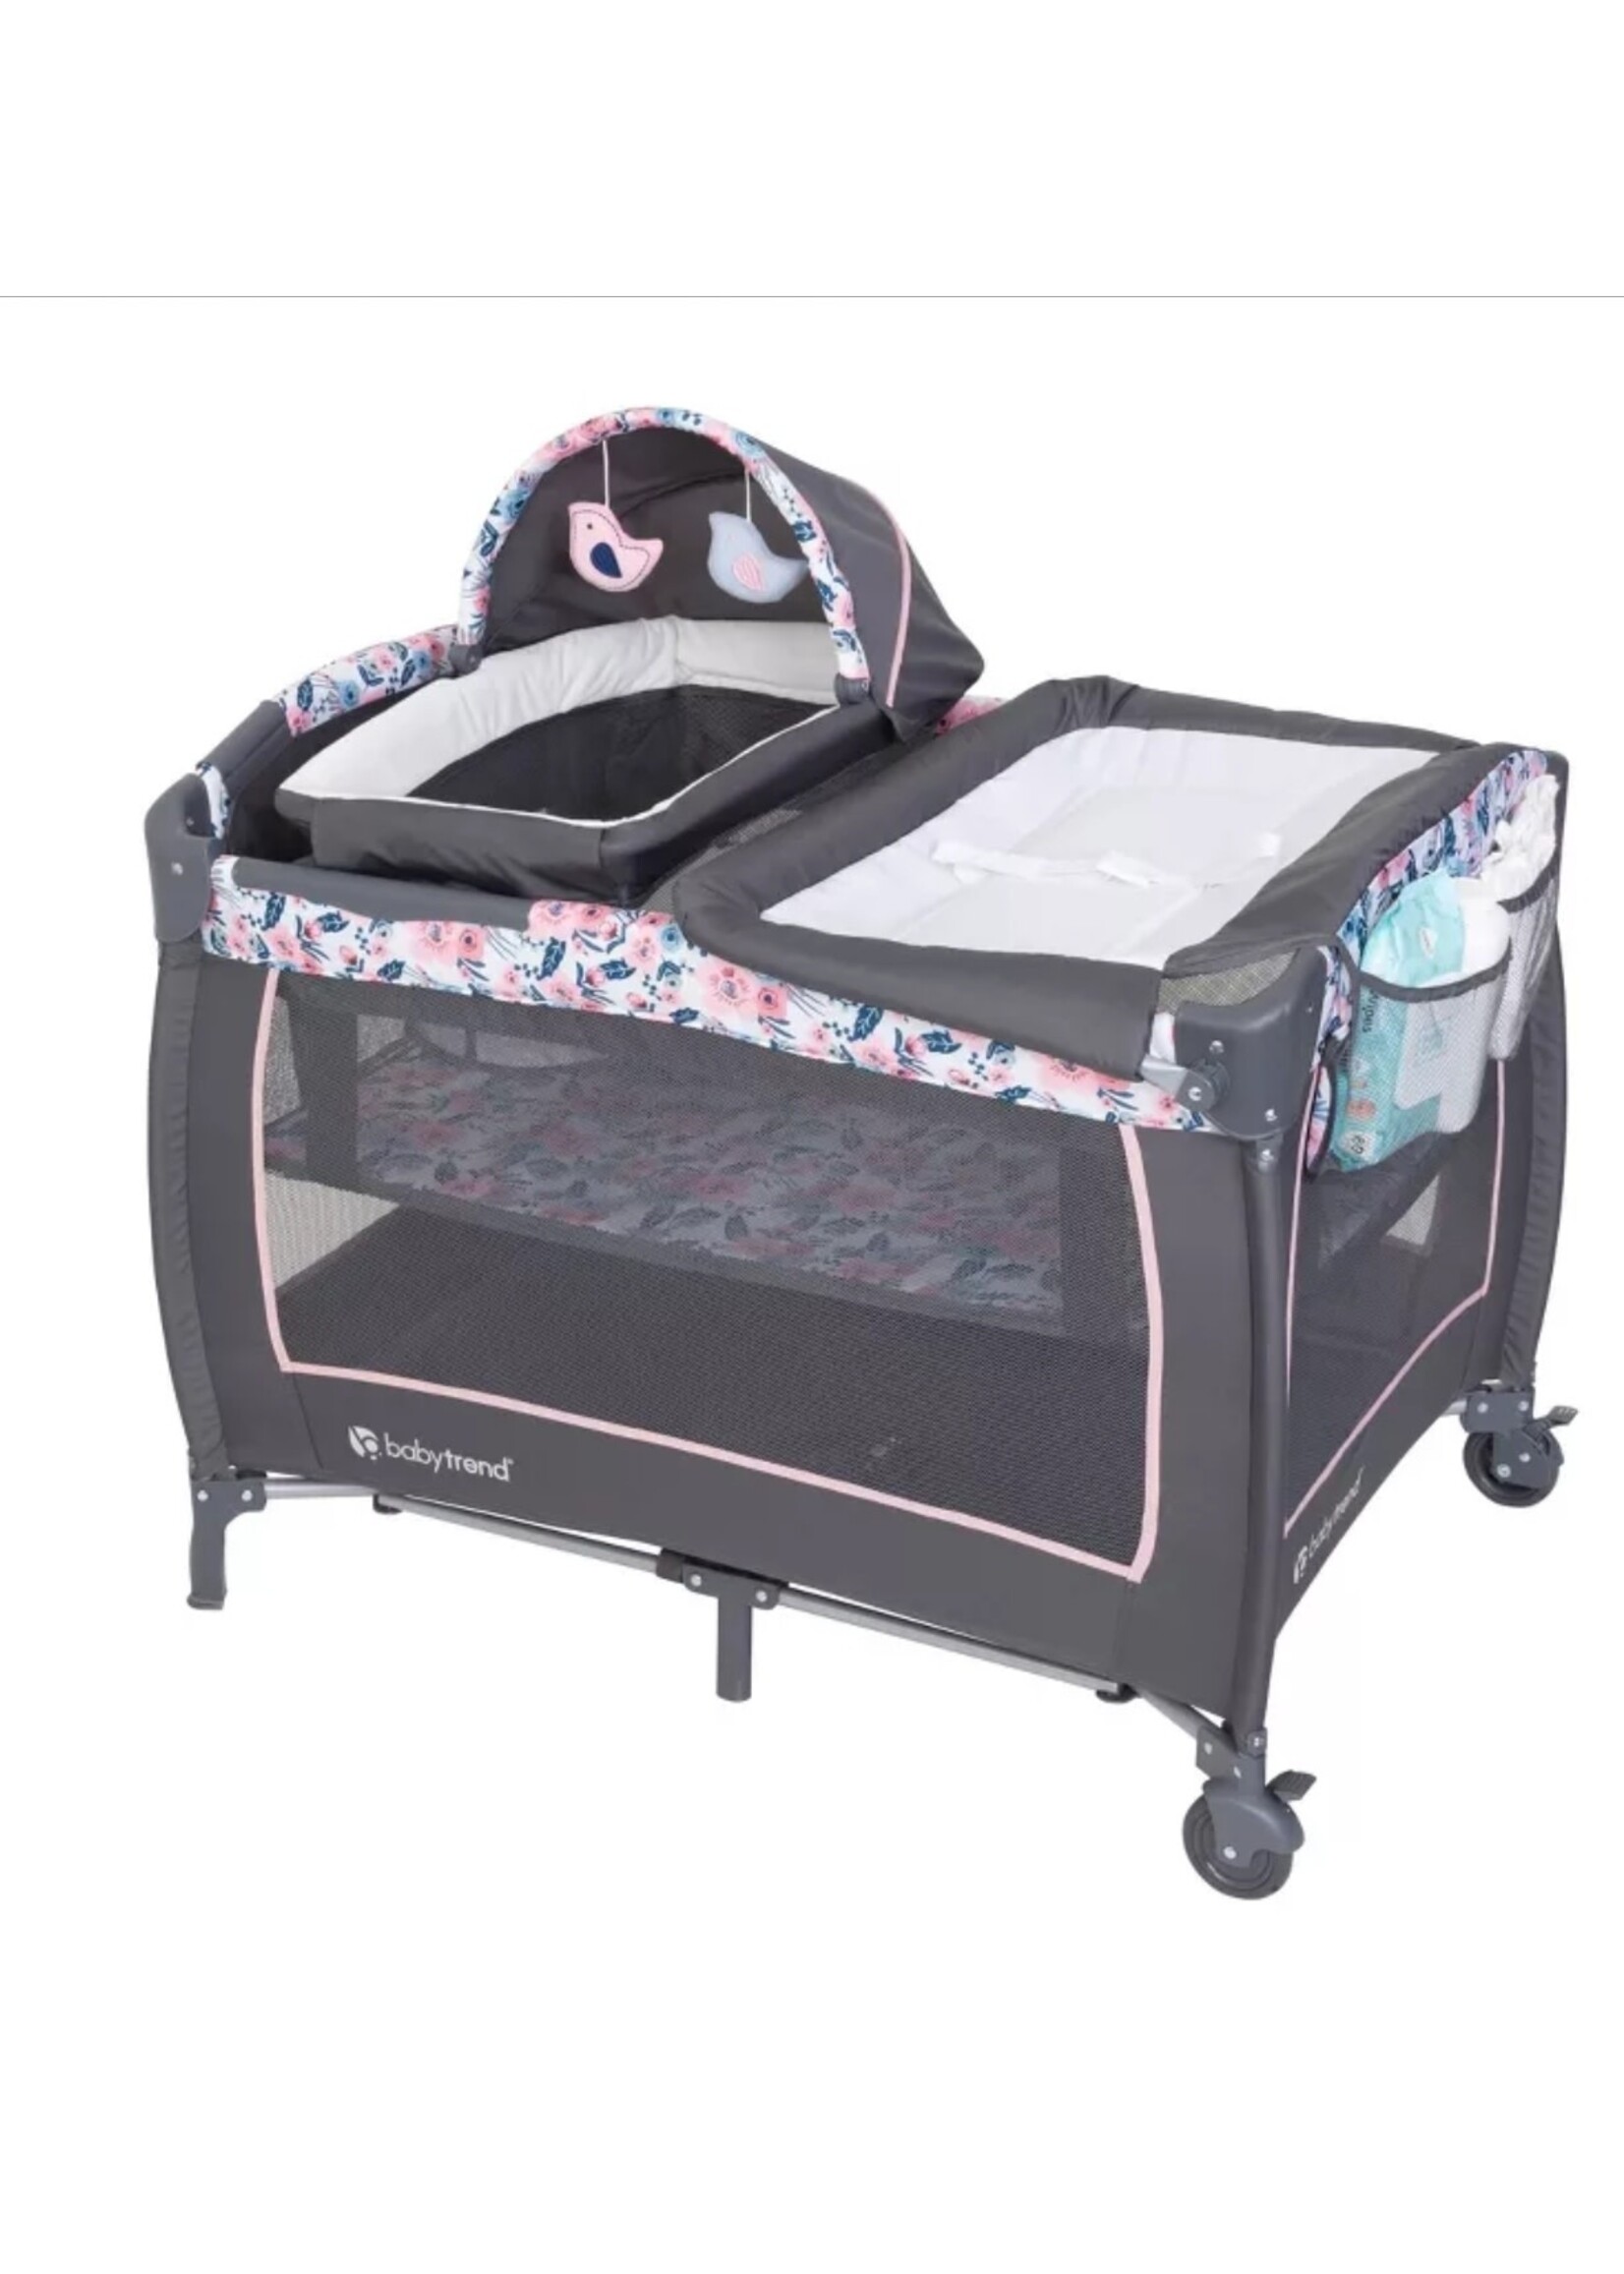 Baby Trend Lil Snooze Deluxe II Nursery Center - Bluebell